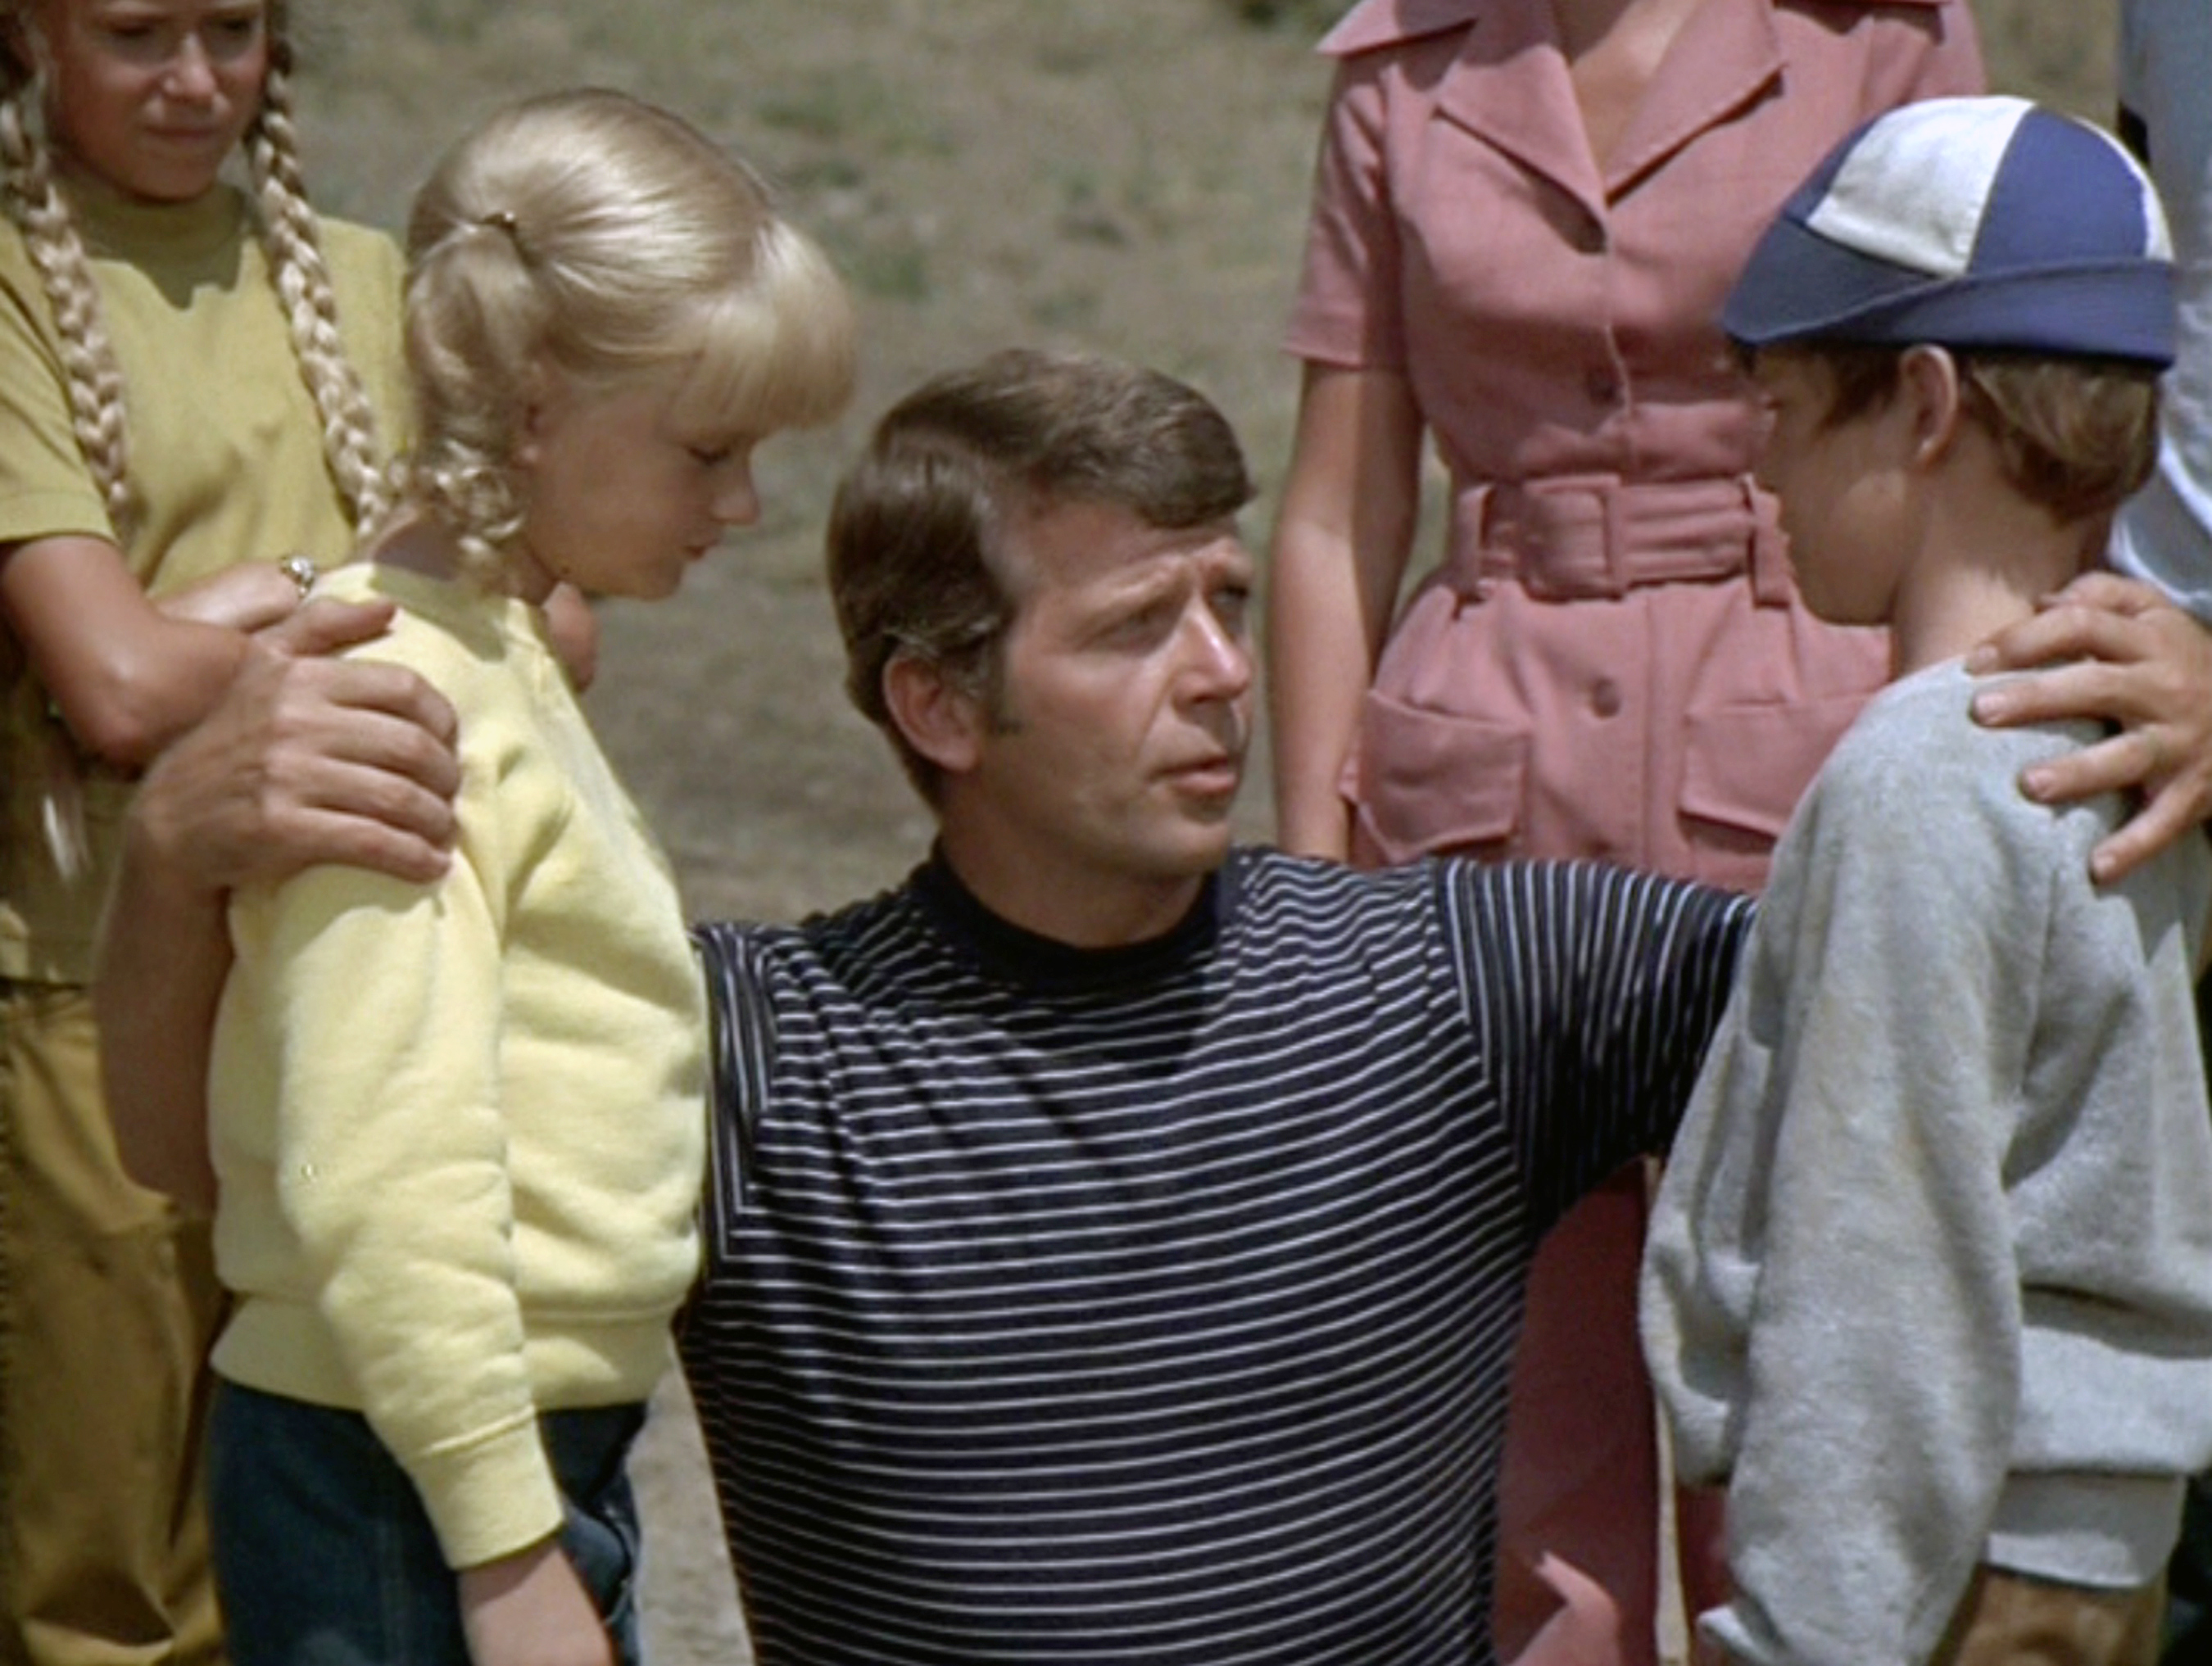 Susan Olsen, Robert Reed and Mike Lookinland as Cindy, Mike, and Bobby Brady in "The Brady Braves" episode of "The Brady Bunch" in 1971 | Source: Getty Images